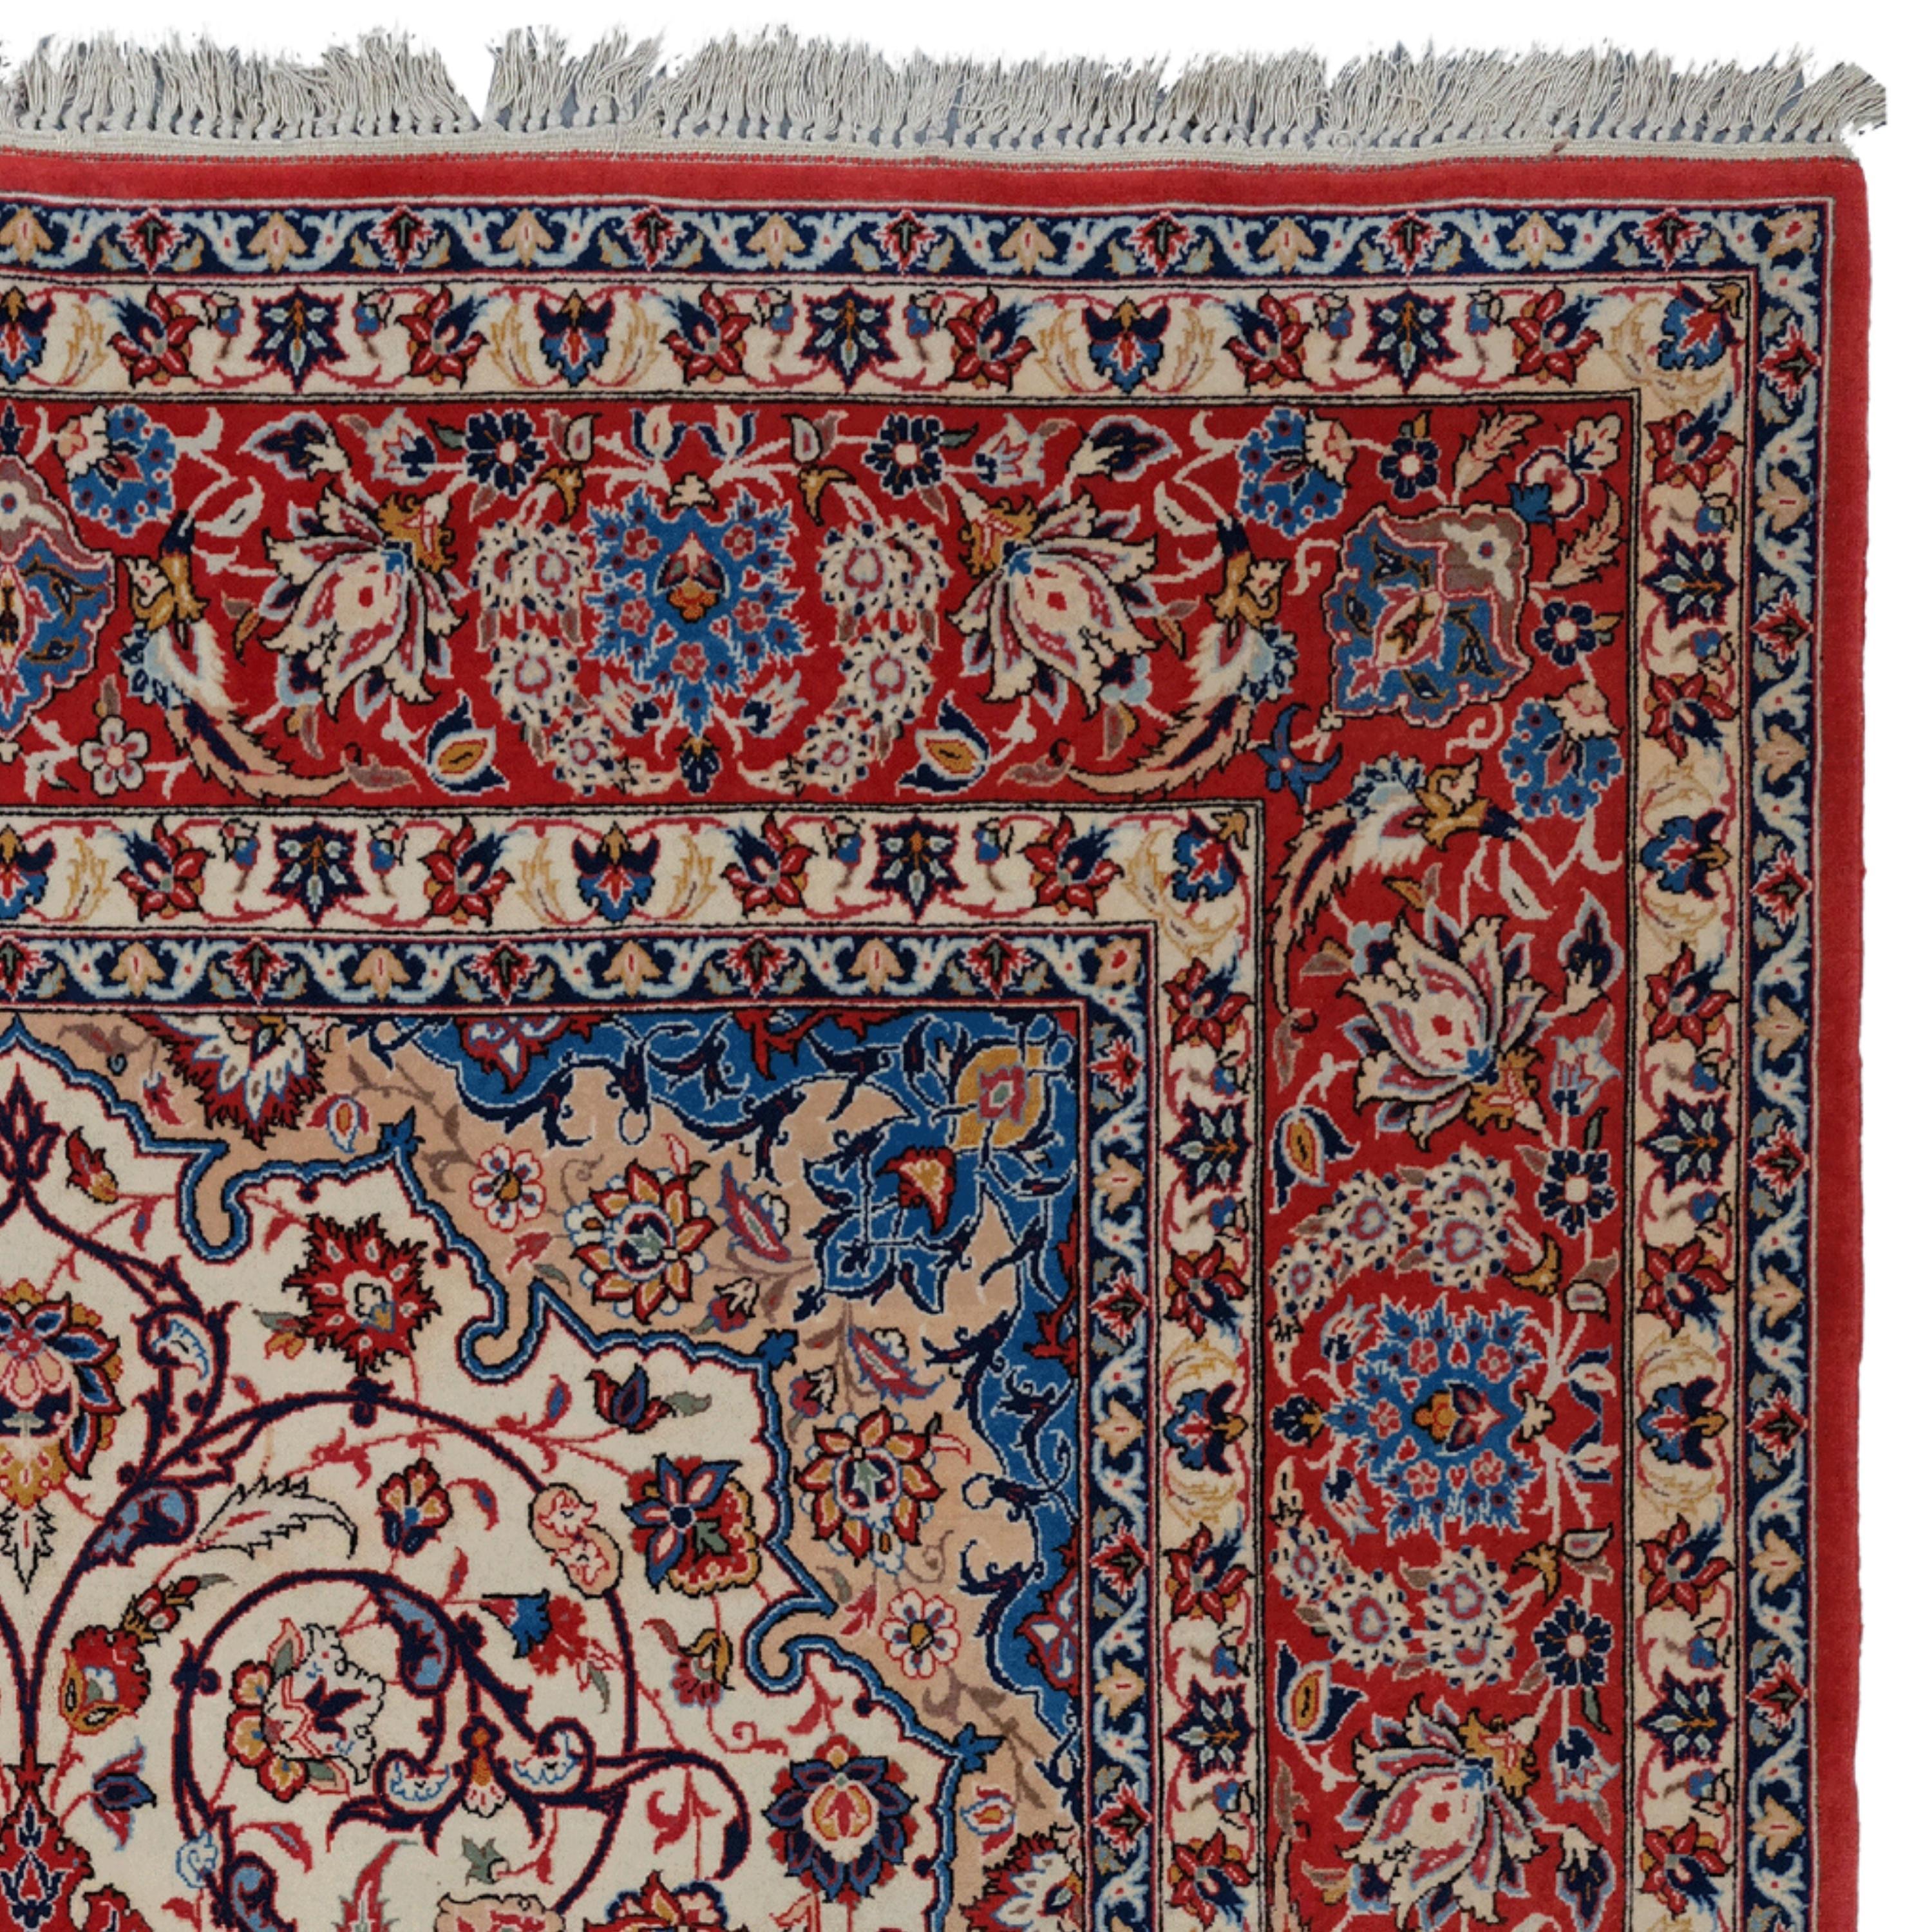 Antique Isfahan Rug - Late of 19th Century Isfahan Rug, Antique Rug, Vintage Rug In Good Condition For Sale In Sultanahmet, 34